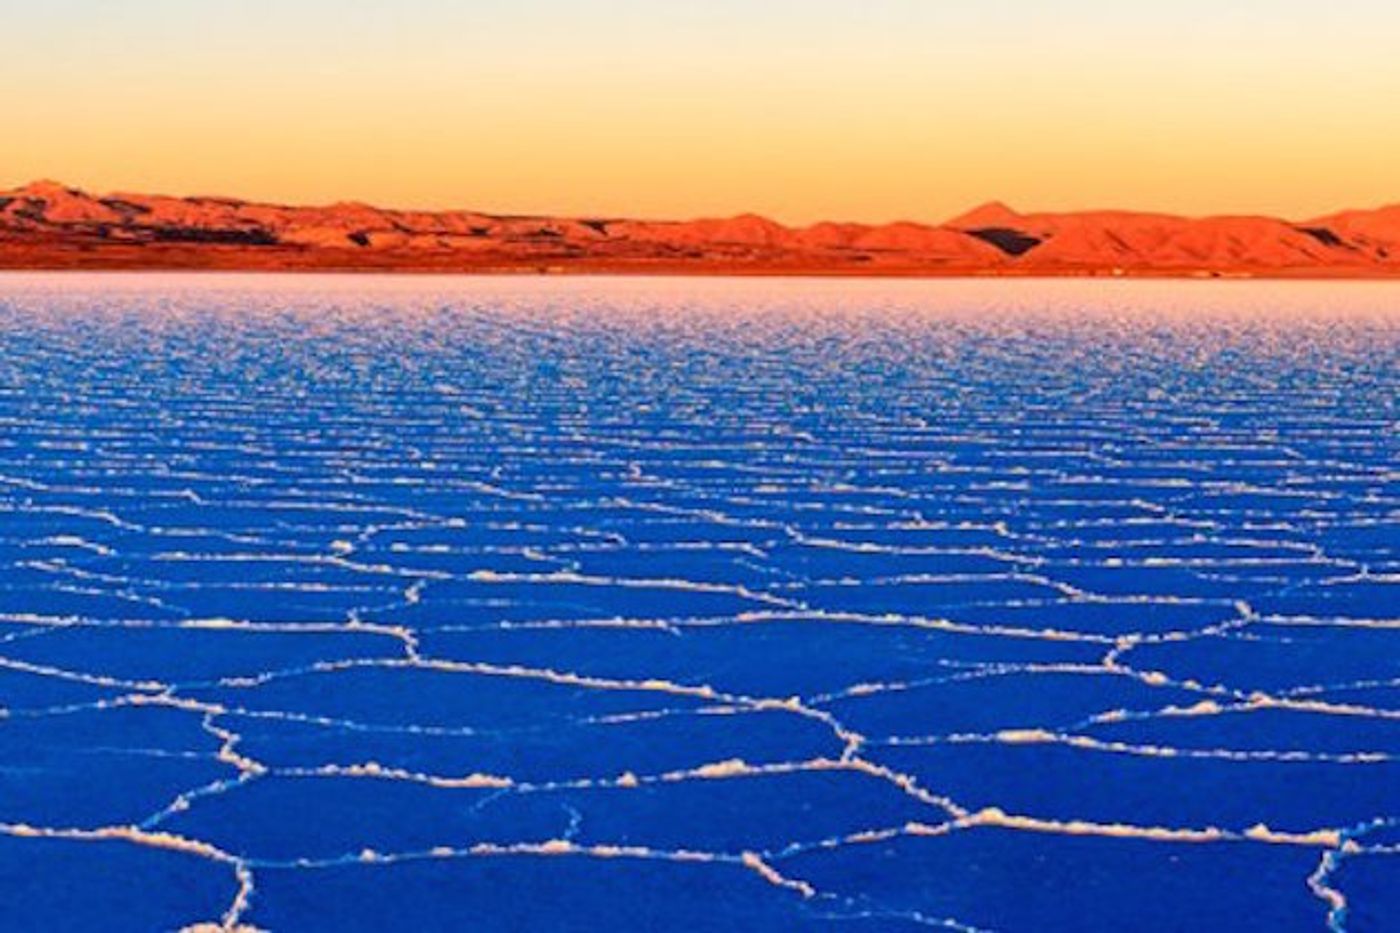 Bolivia's Uyuni Salt Flats, the largest on earth, cover more than 6,000 square miles.